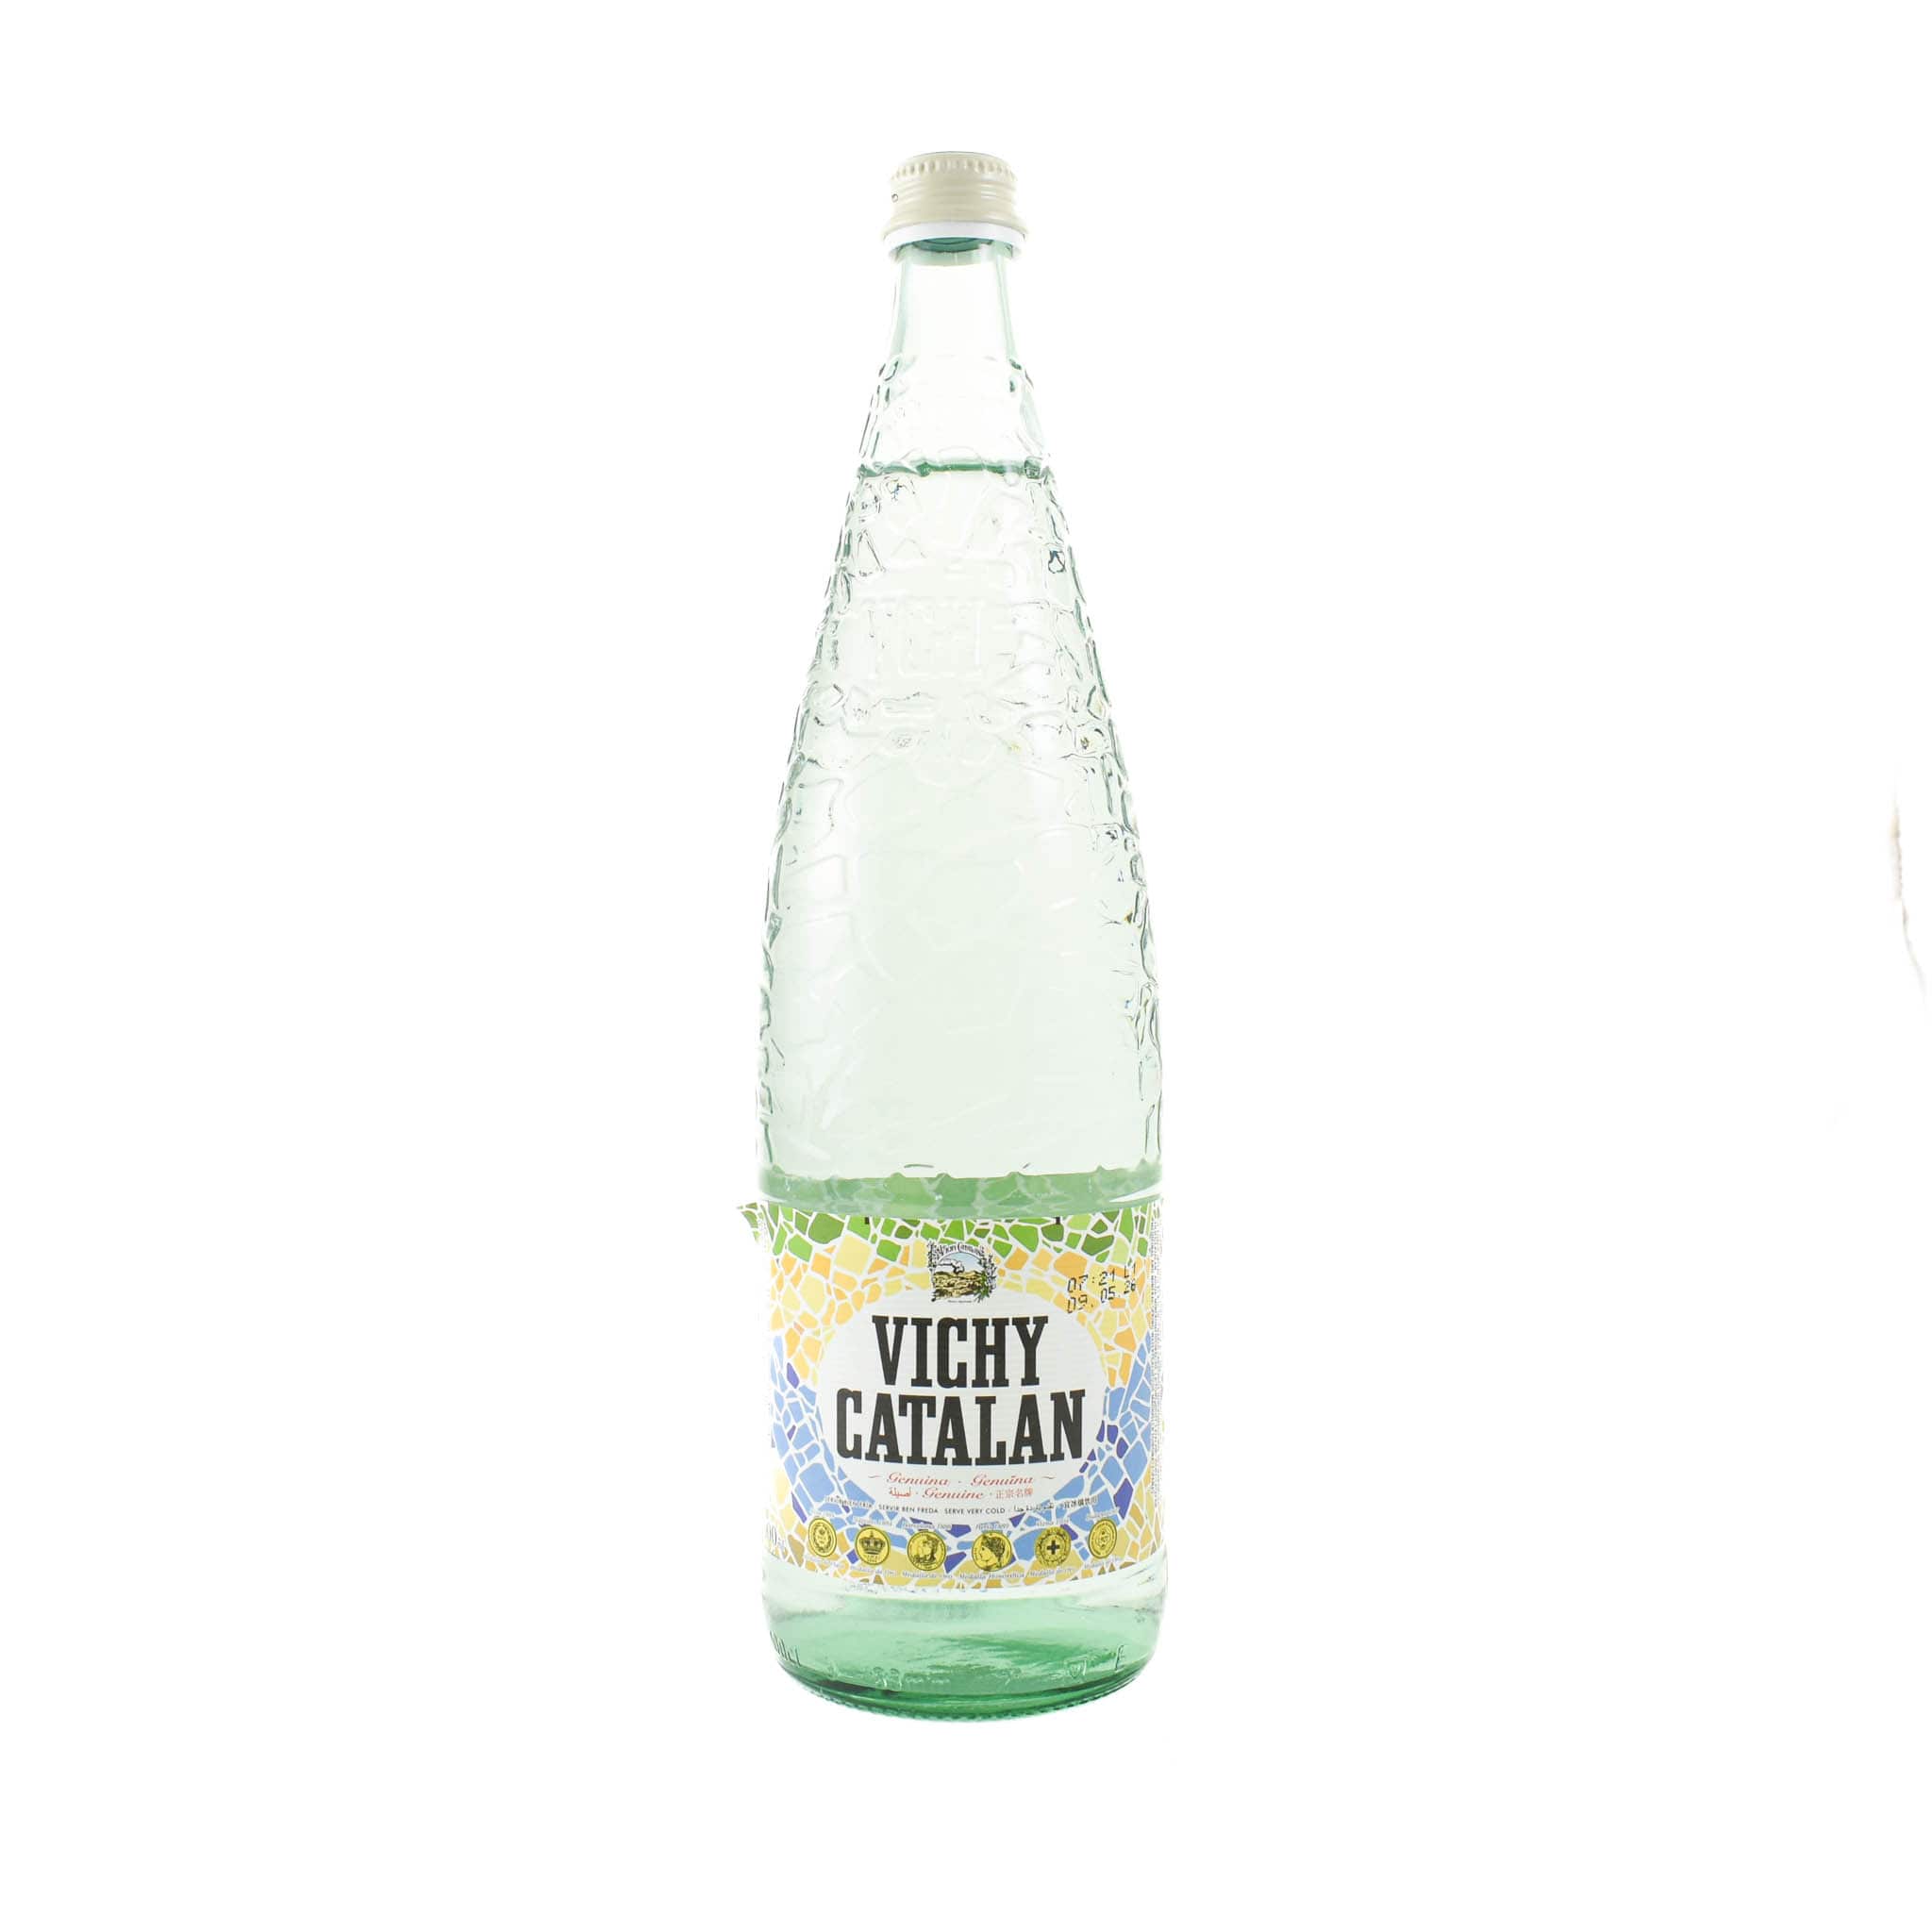 Vichy Catalan Sparkling Mineral Water, 1 Litre